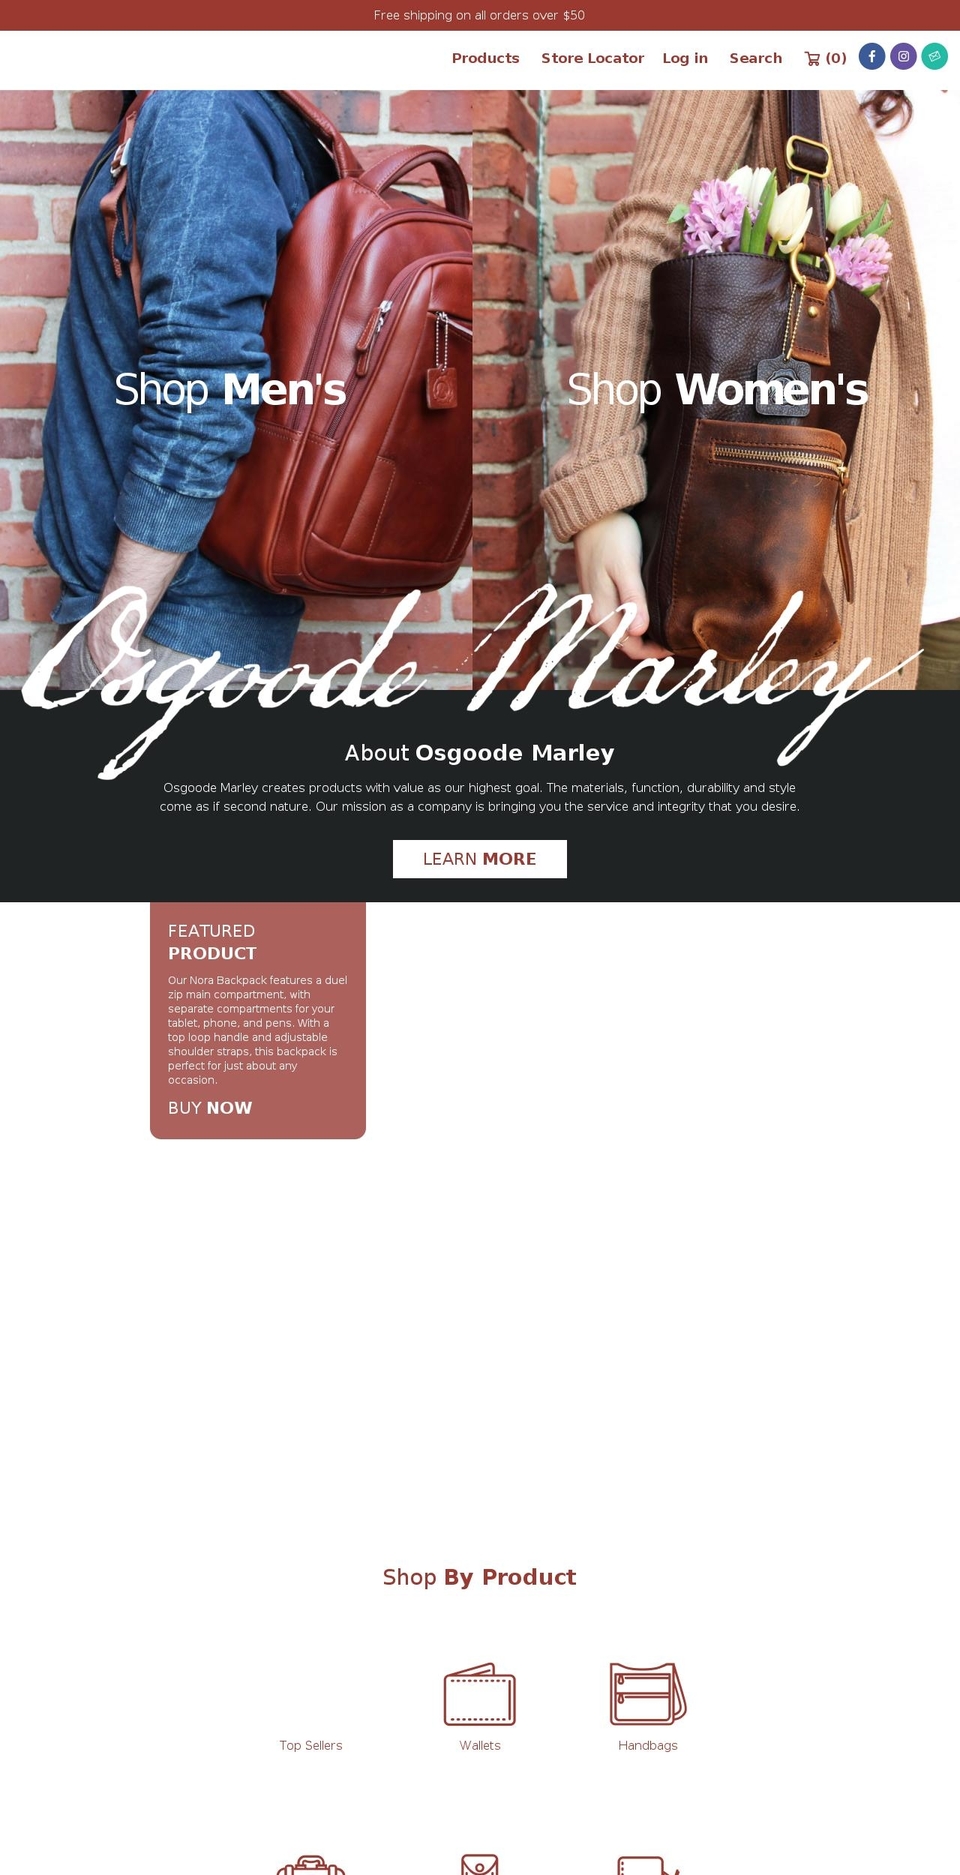 Showcase Shopify theme site example osgoodemarley.com